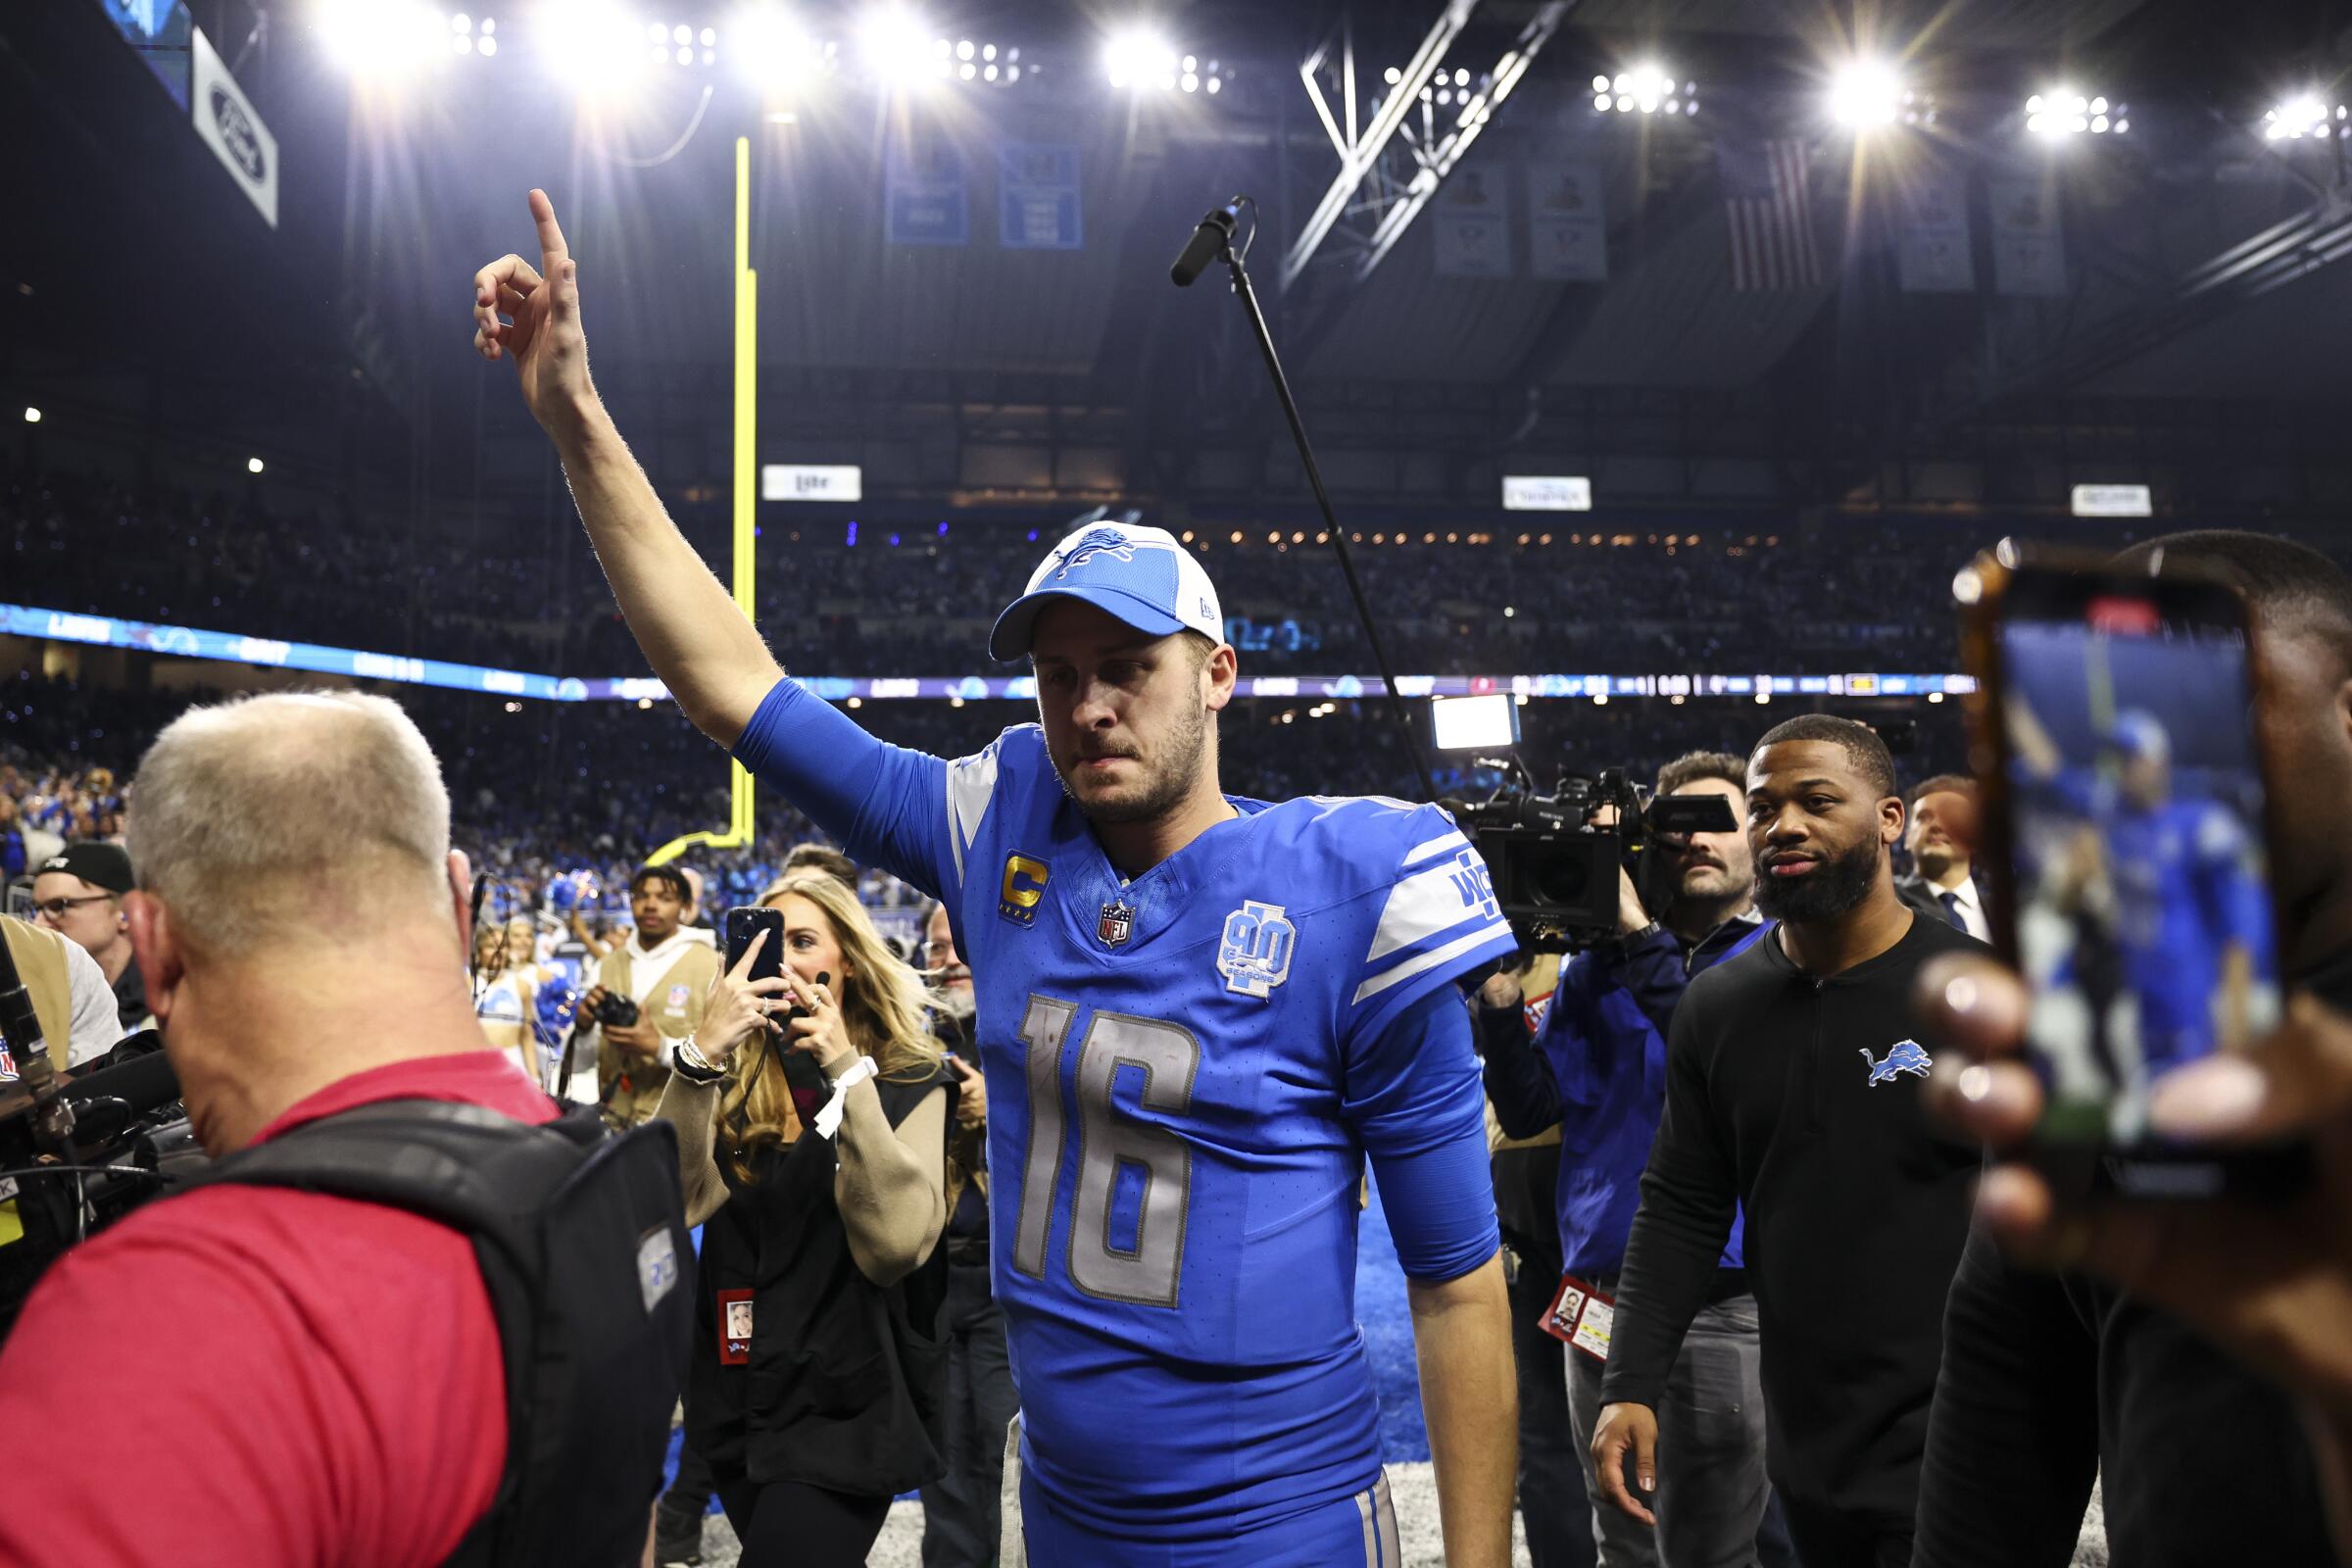 Detroit Lions quarterback Jared Goff celebrates while walking off the field after a 31-23 victory.